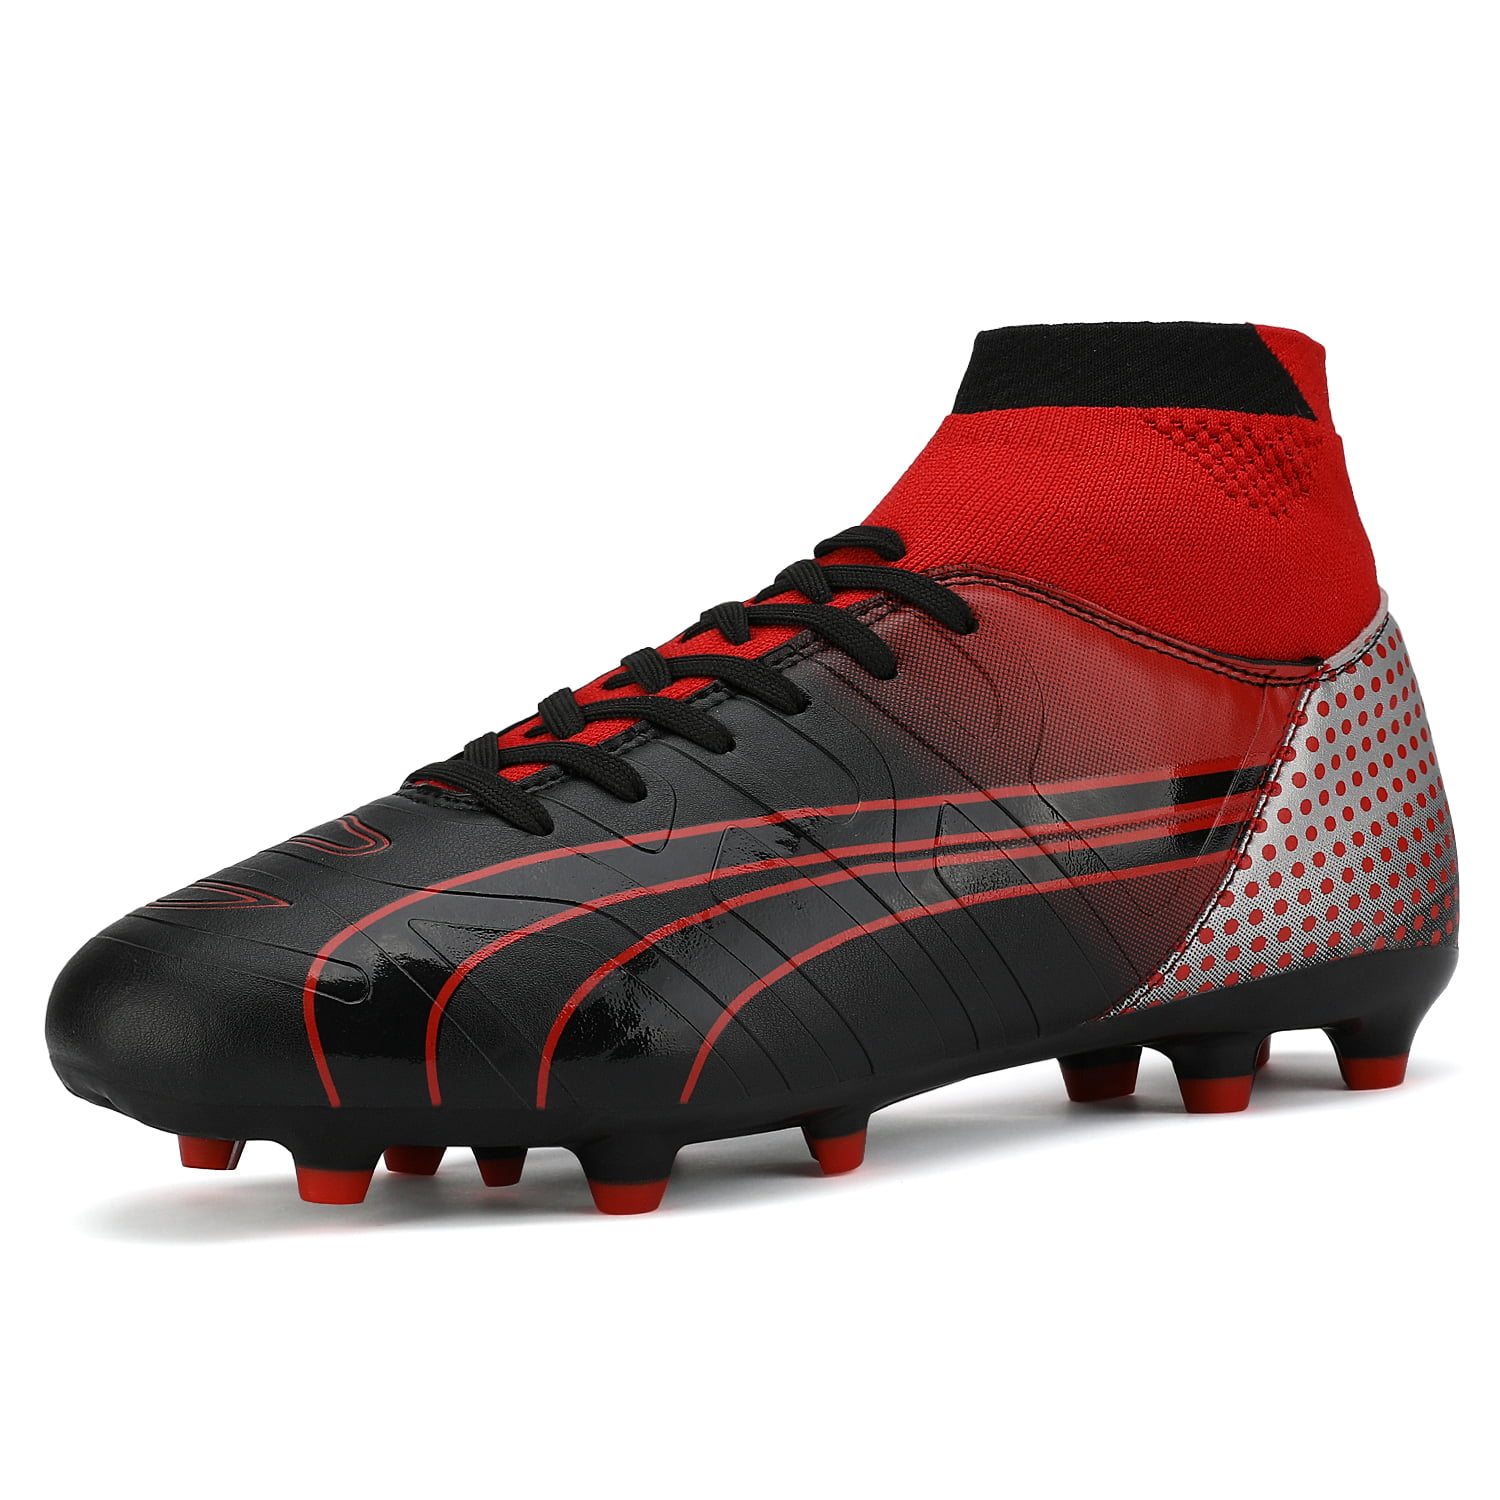 DREAM PAIRS Mens Soccer Cleats Shoes Boys Outdoor Athletic Football Sneakers 